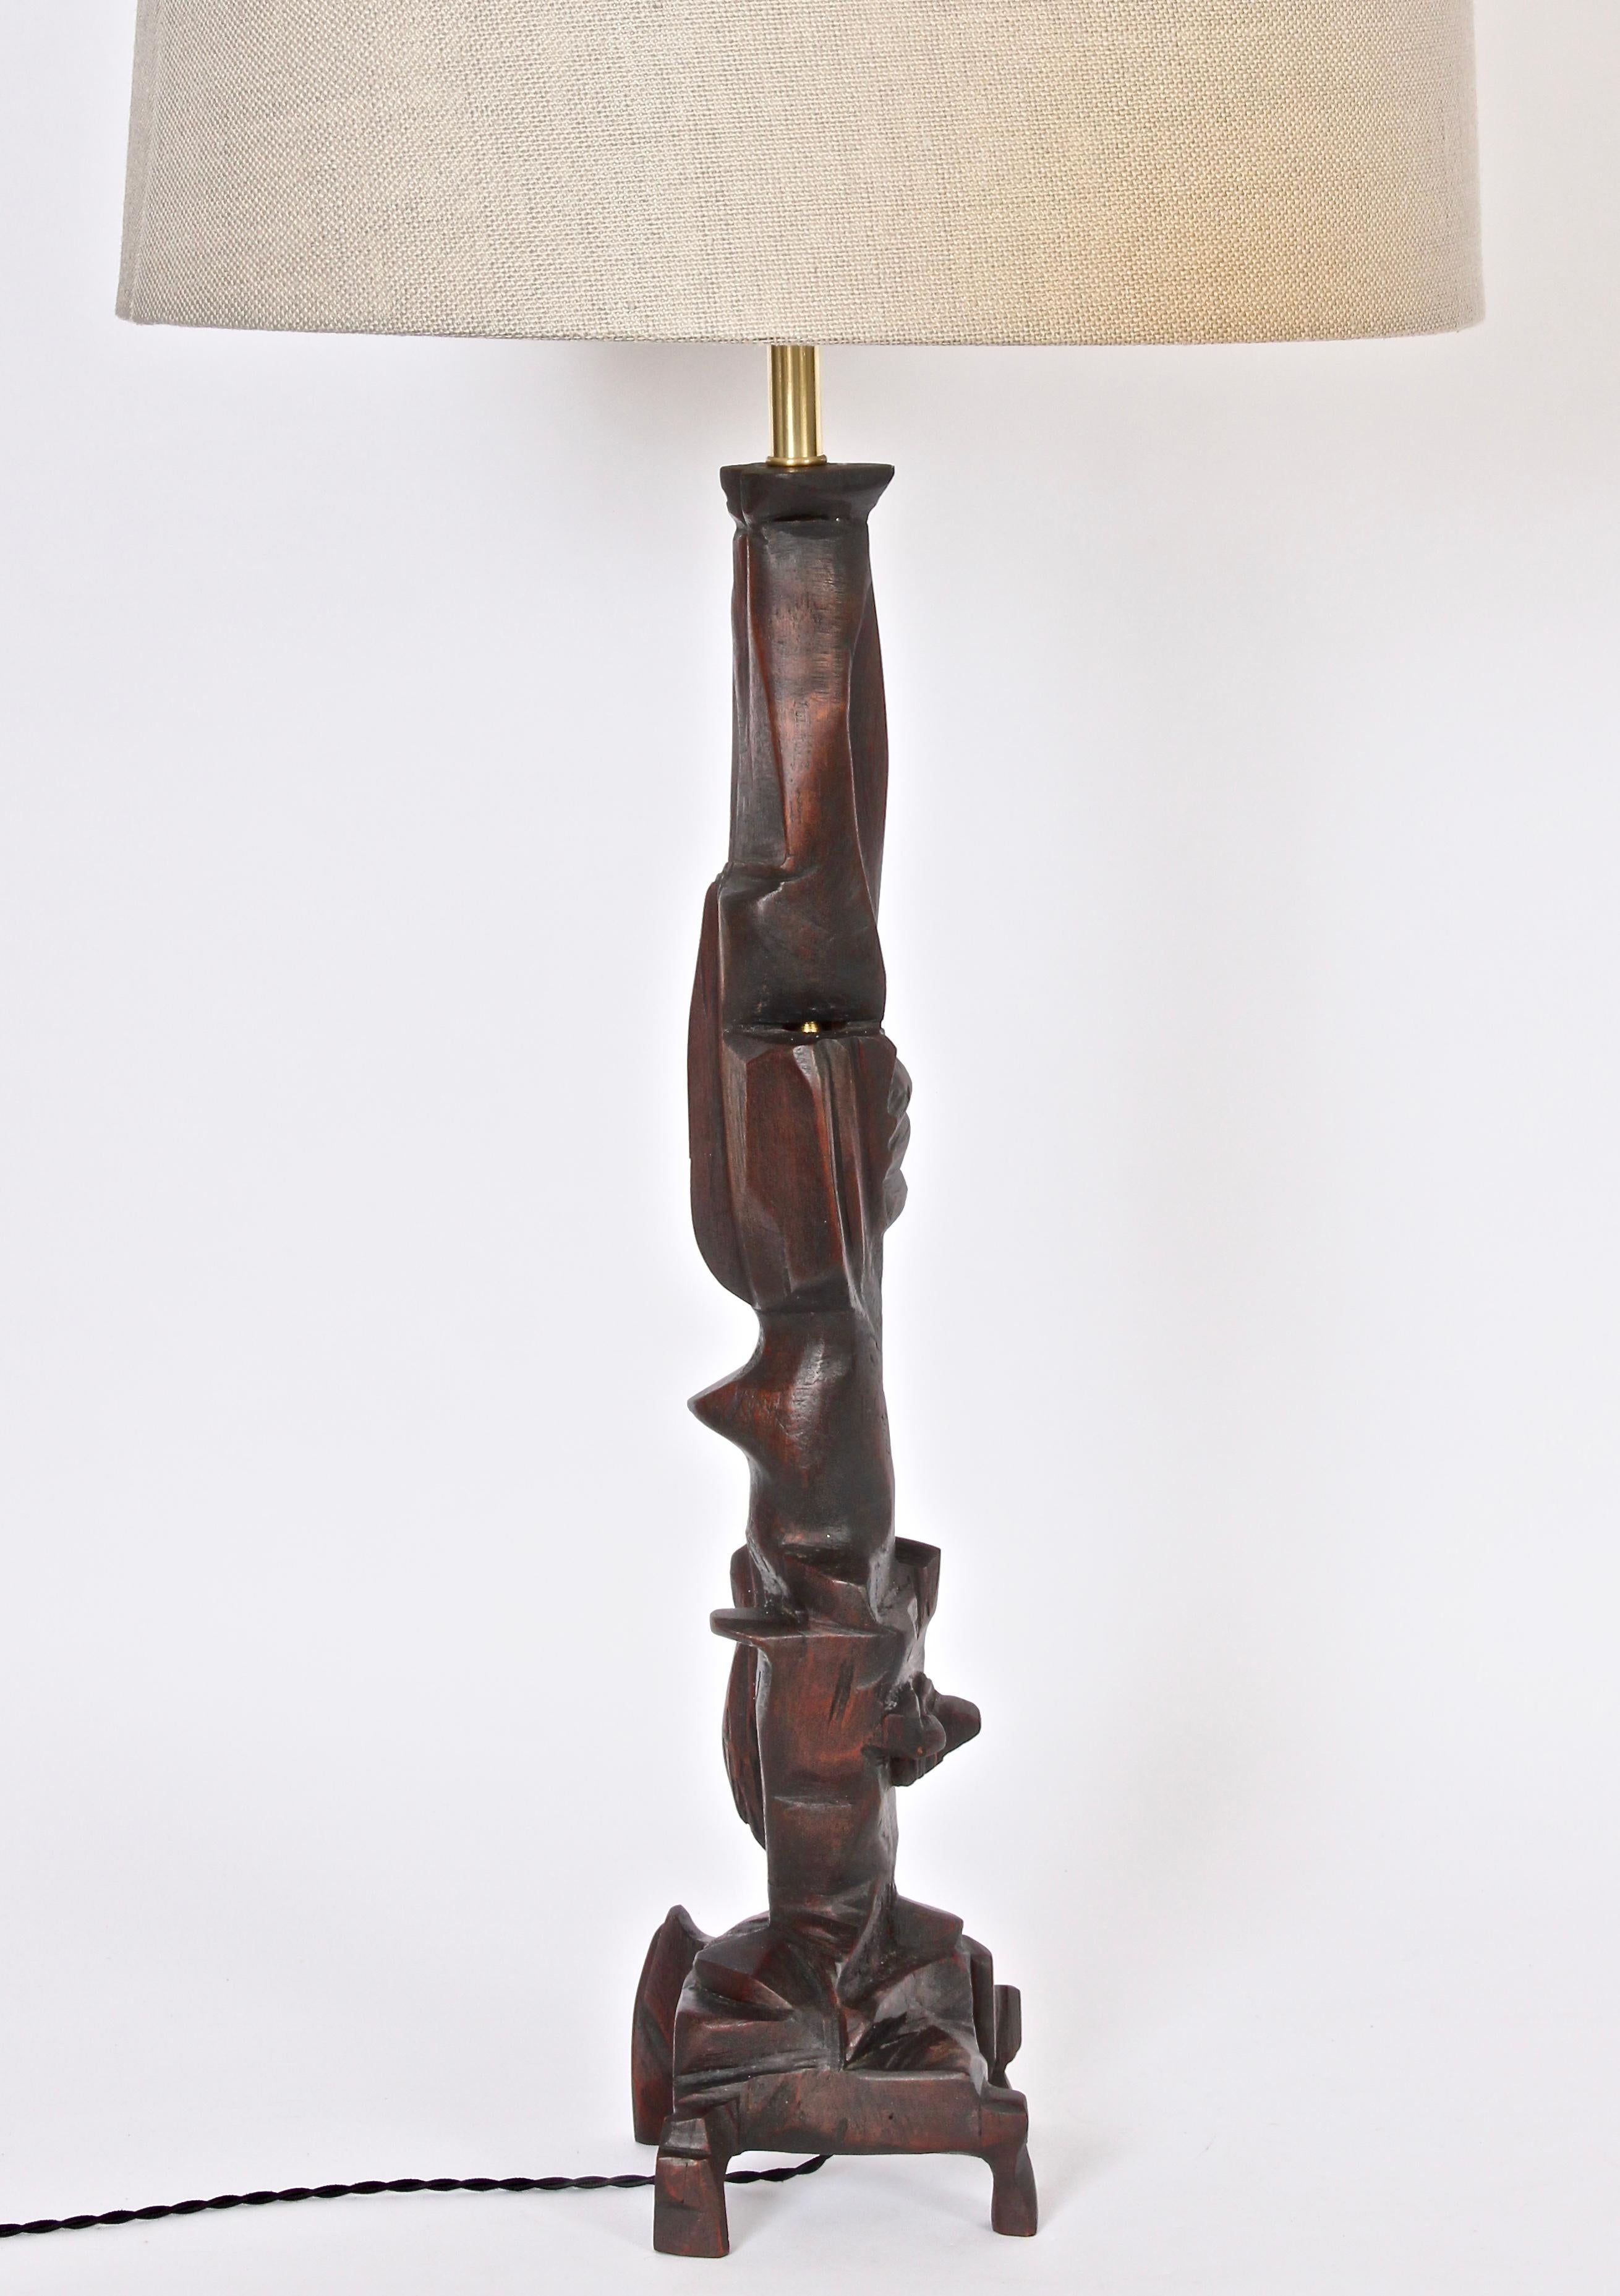 Tall handcrafted asymmetric wooden table lamp by New York artist, Smokey Tunis. Featuring a hand carved sculptural idiosyncratic form in stained Poplar. Small footprint. Shade shown for display only (10H x 17D top x 18D bottom). 31 H top of socket.